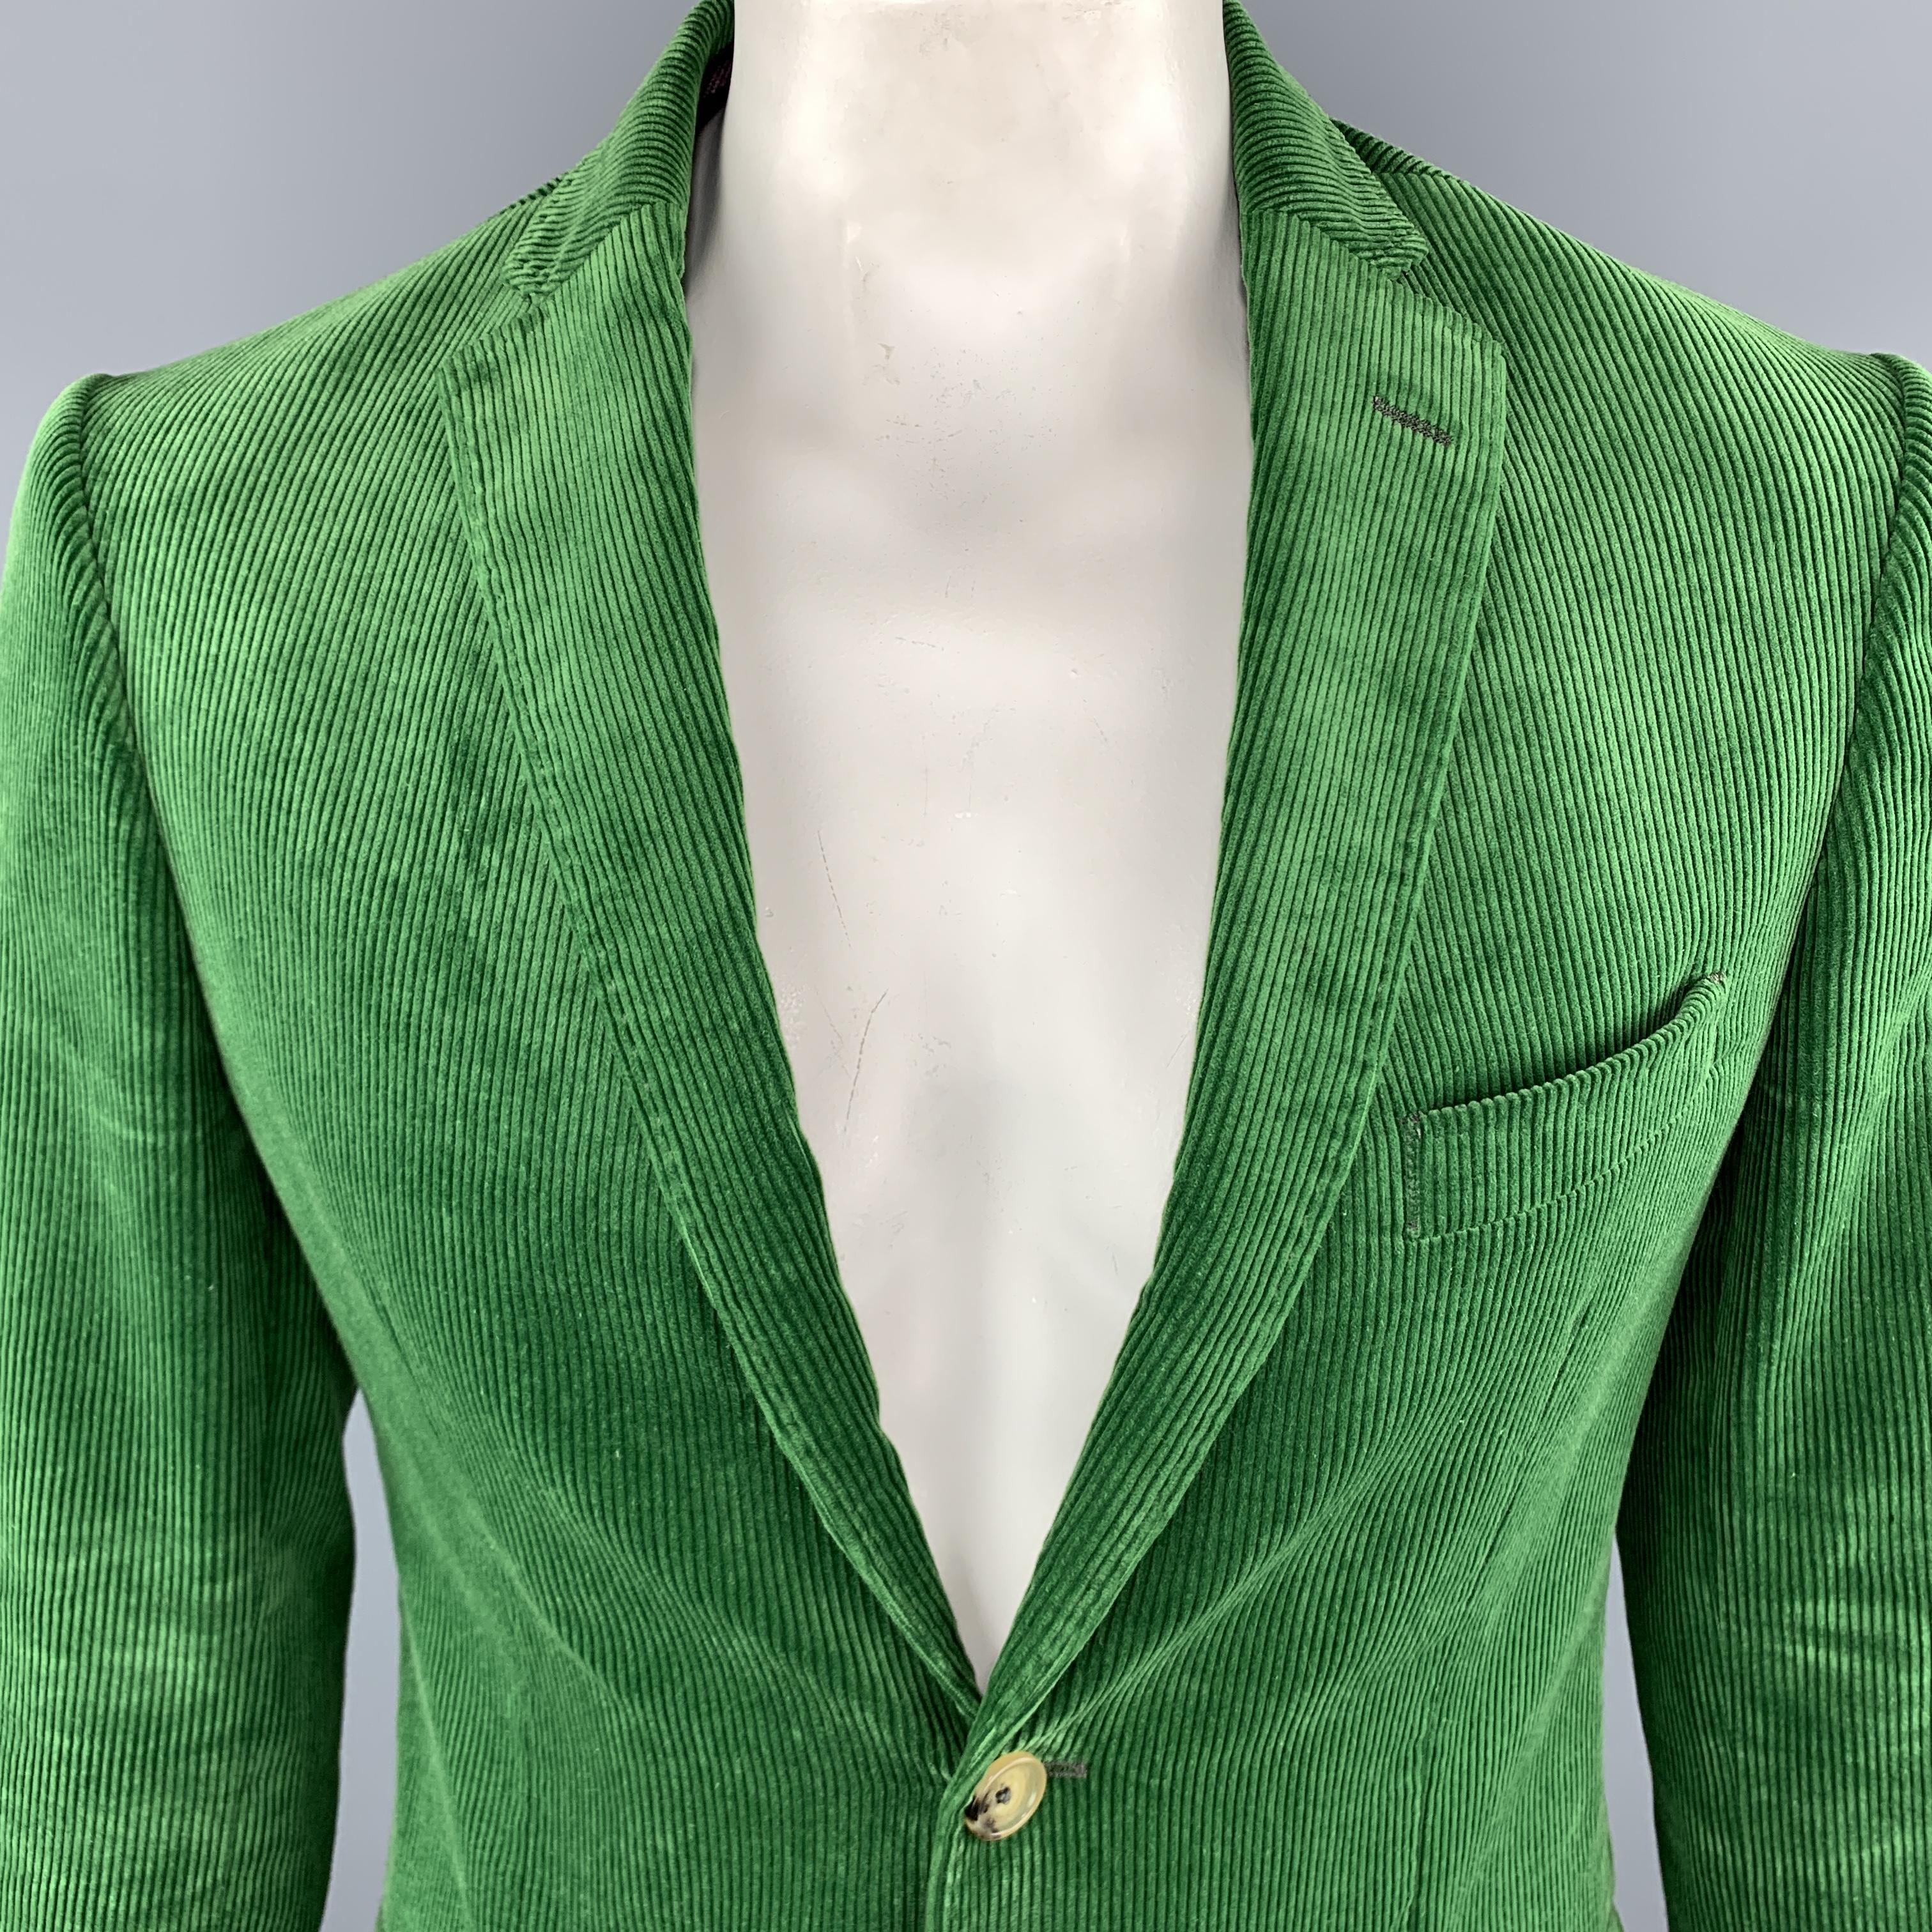 ETRO Sport Coat Jacket comes in a green tone in a corduroy cotton material, with a notch lapel, two buttons at closure, single breasted, slit and flap pockets, buttoned cuffs, and a double vent at back. Made in Italy.

Excellent Pre-Owned